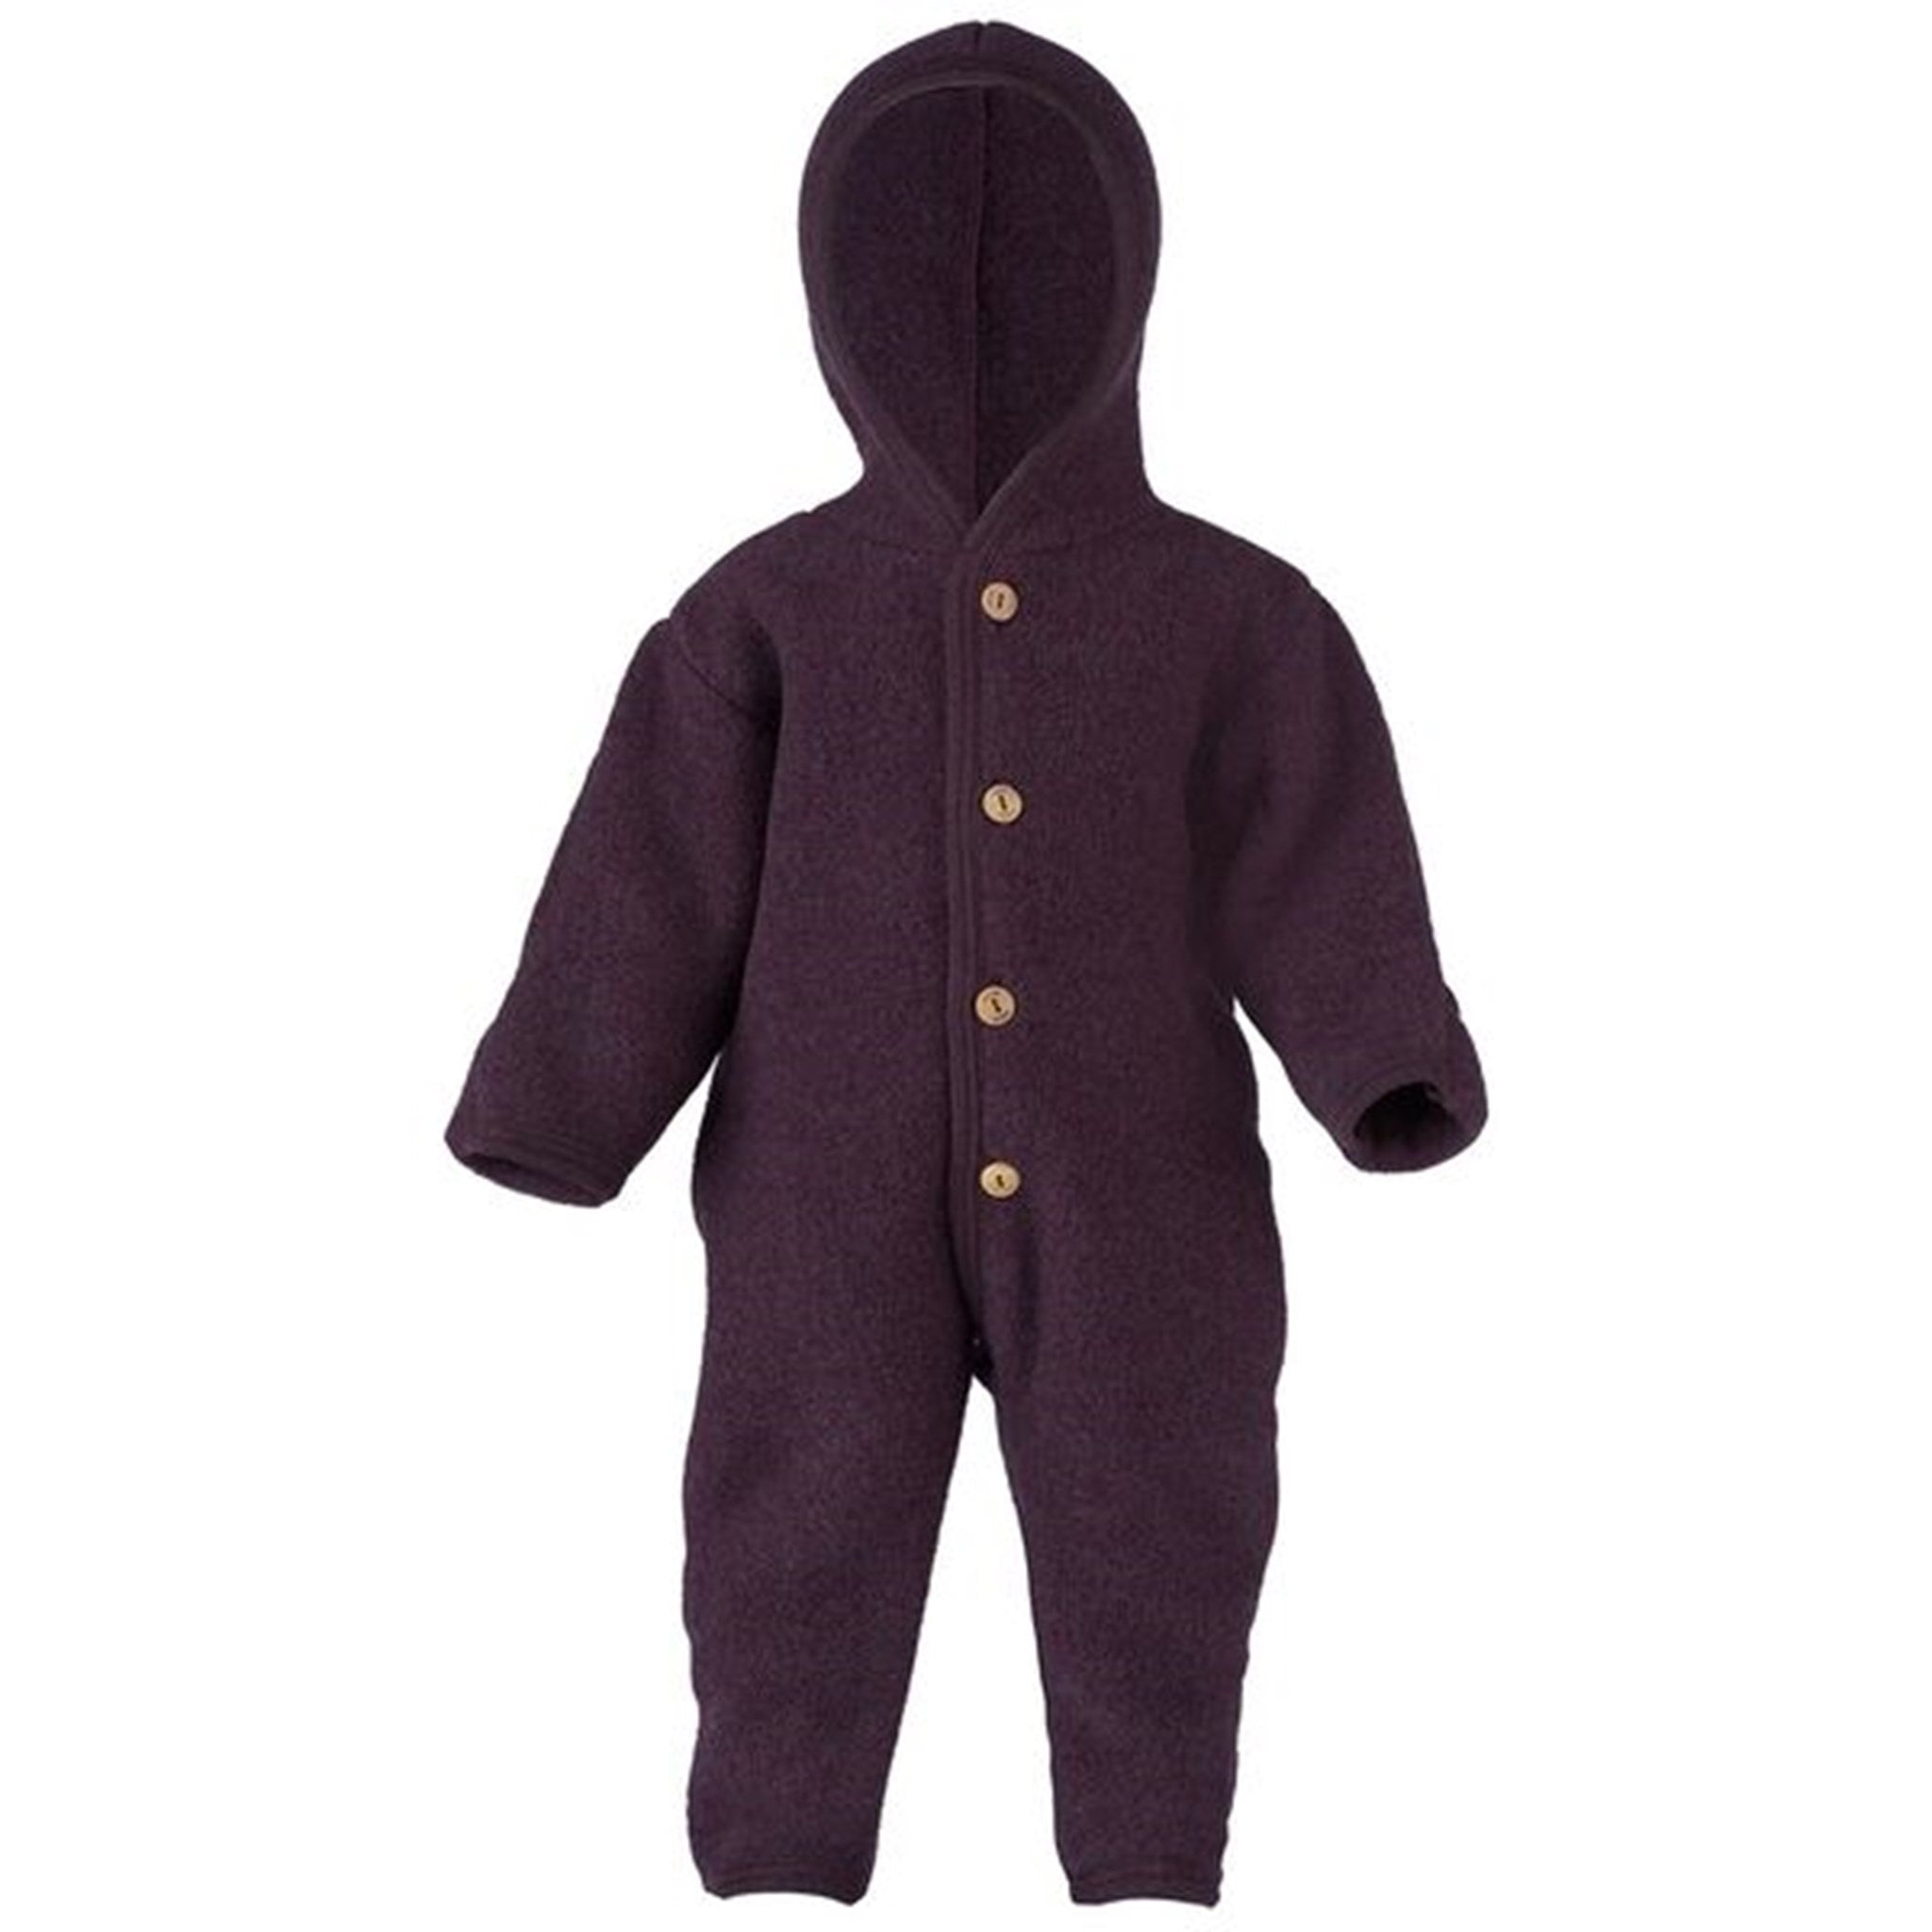 Engel Hooded Overall w. Buttons Lilac Mélange